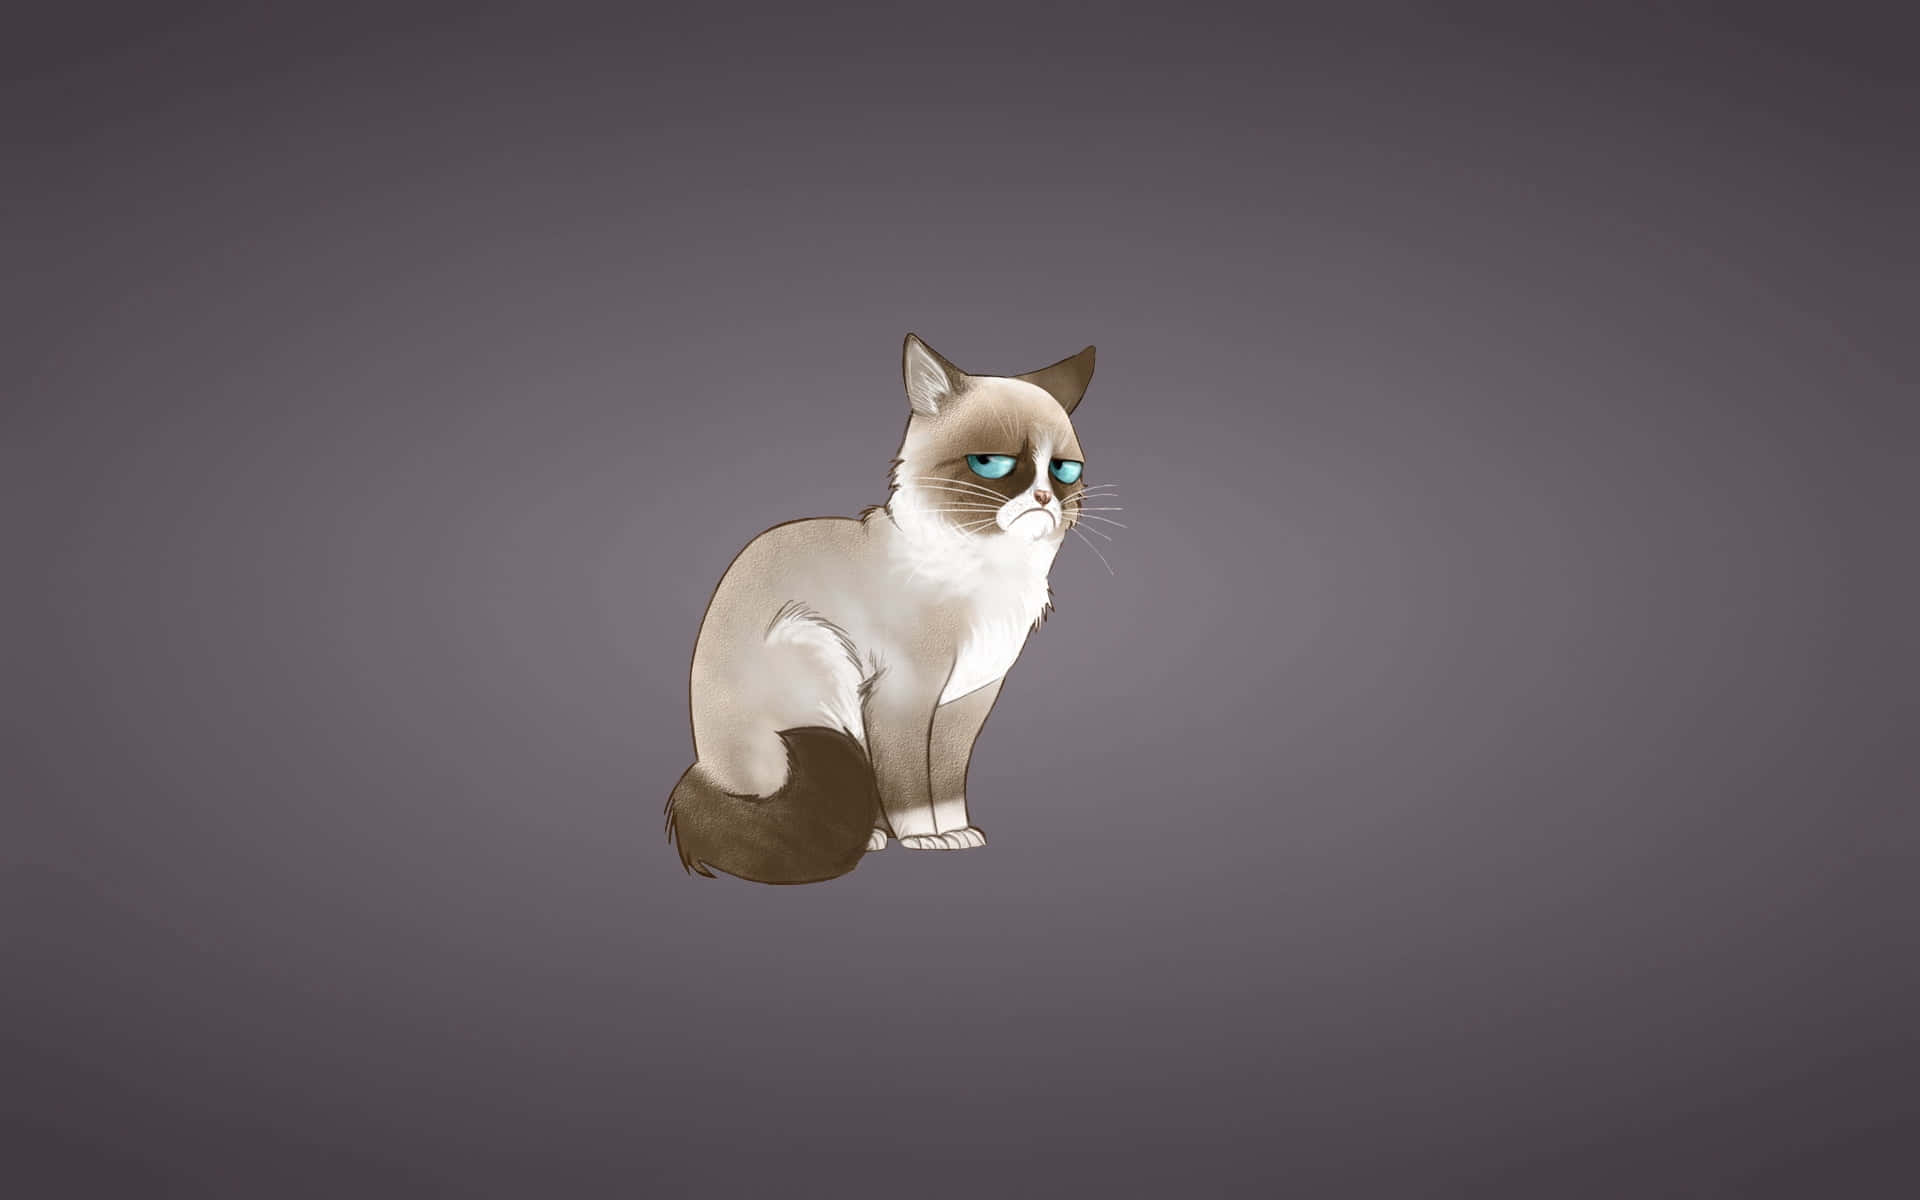 A Cat With Blue Eyes Sitting On A Gray Background